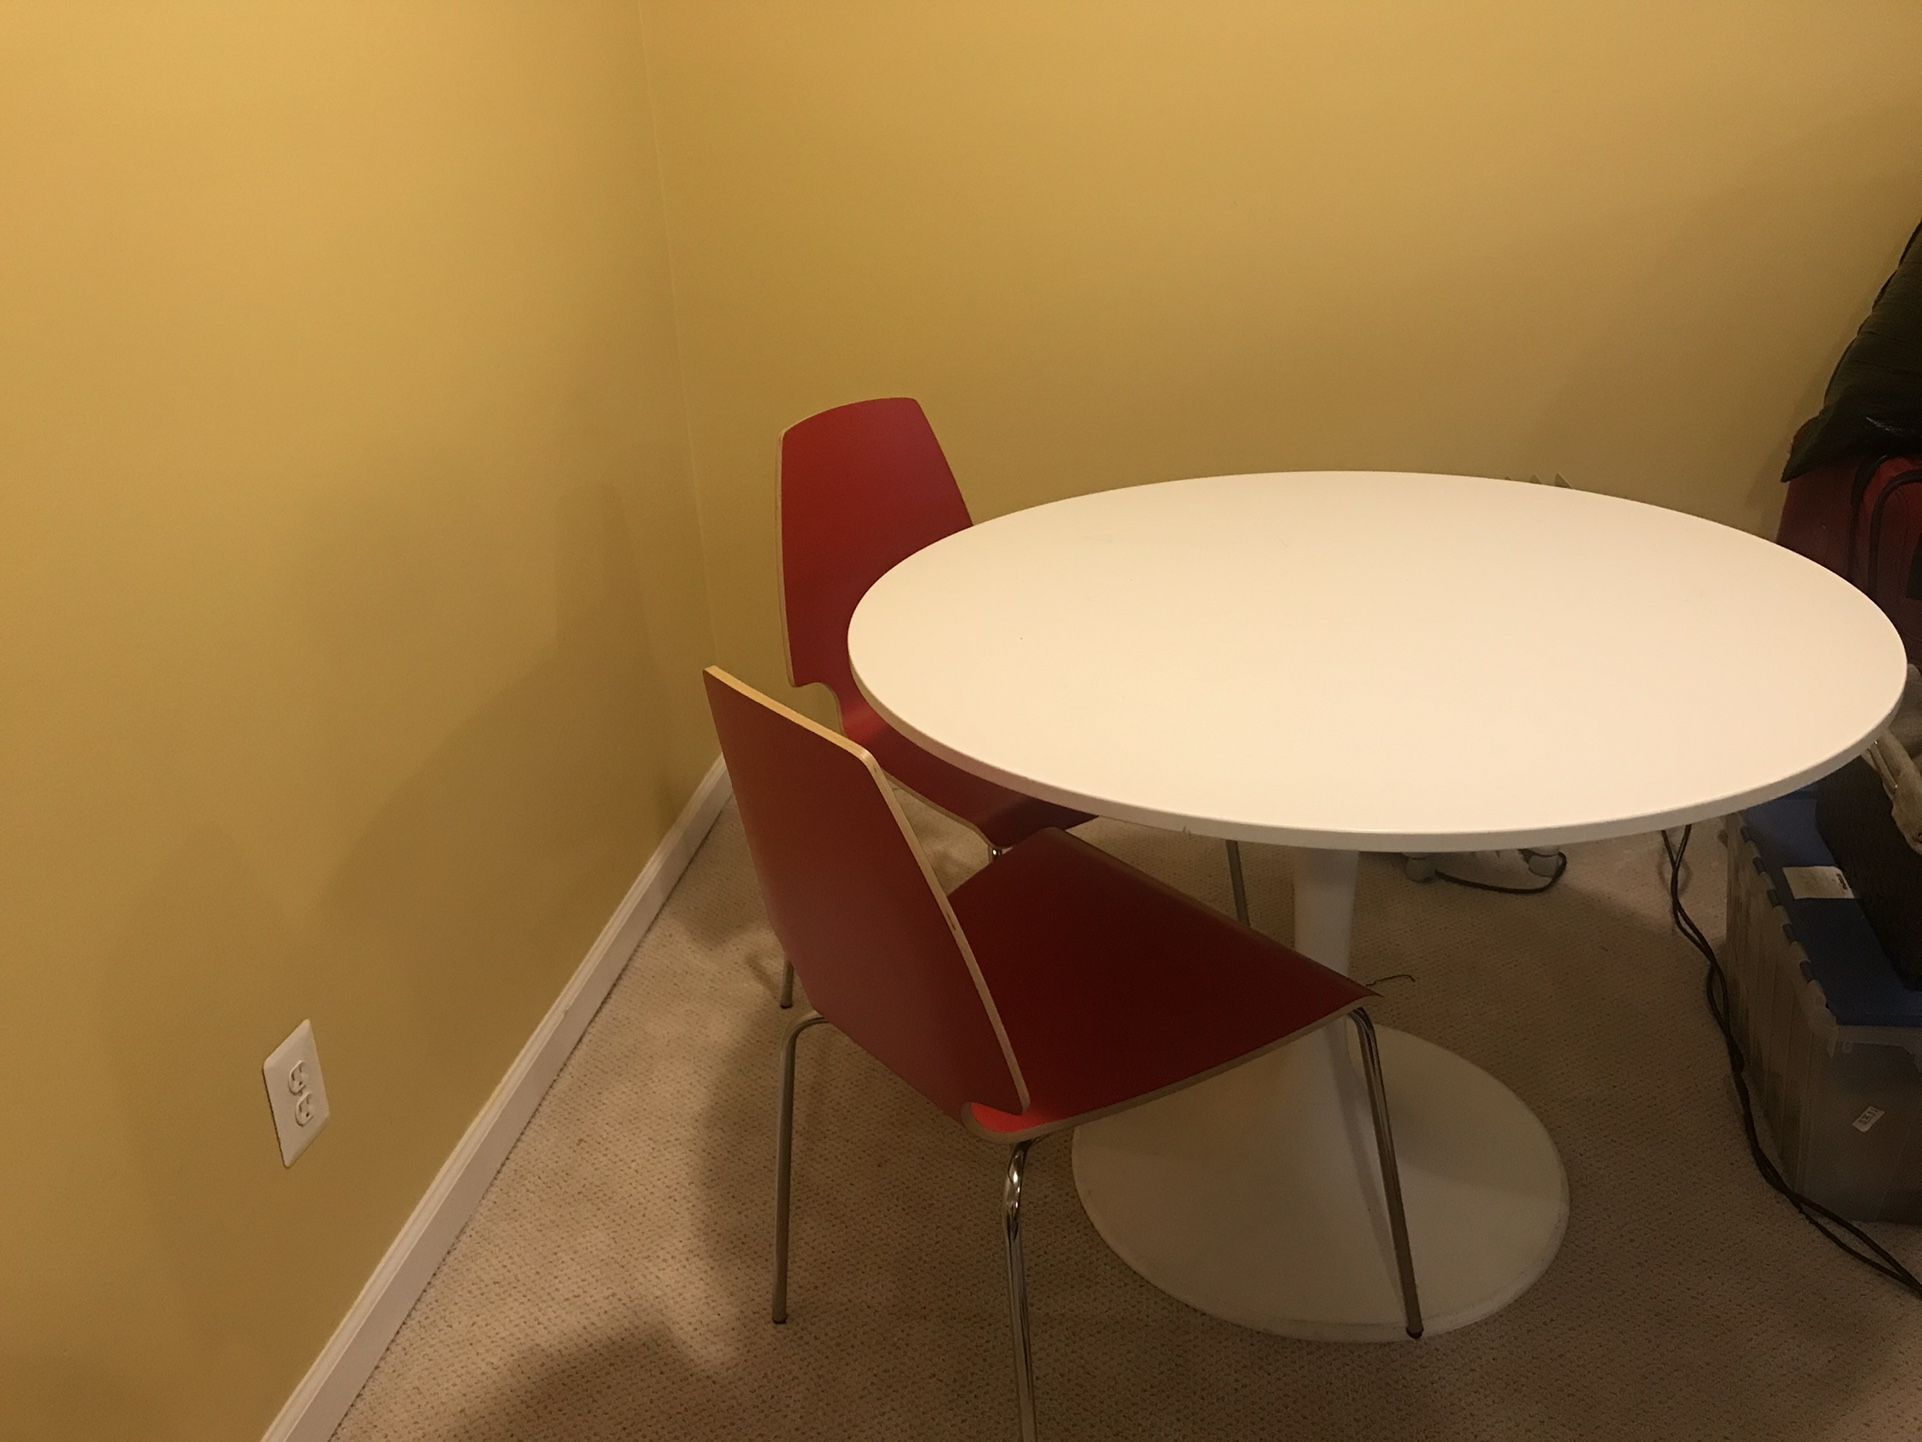 Round White Table, Red chairs